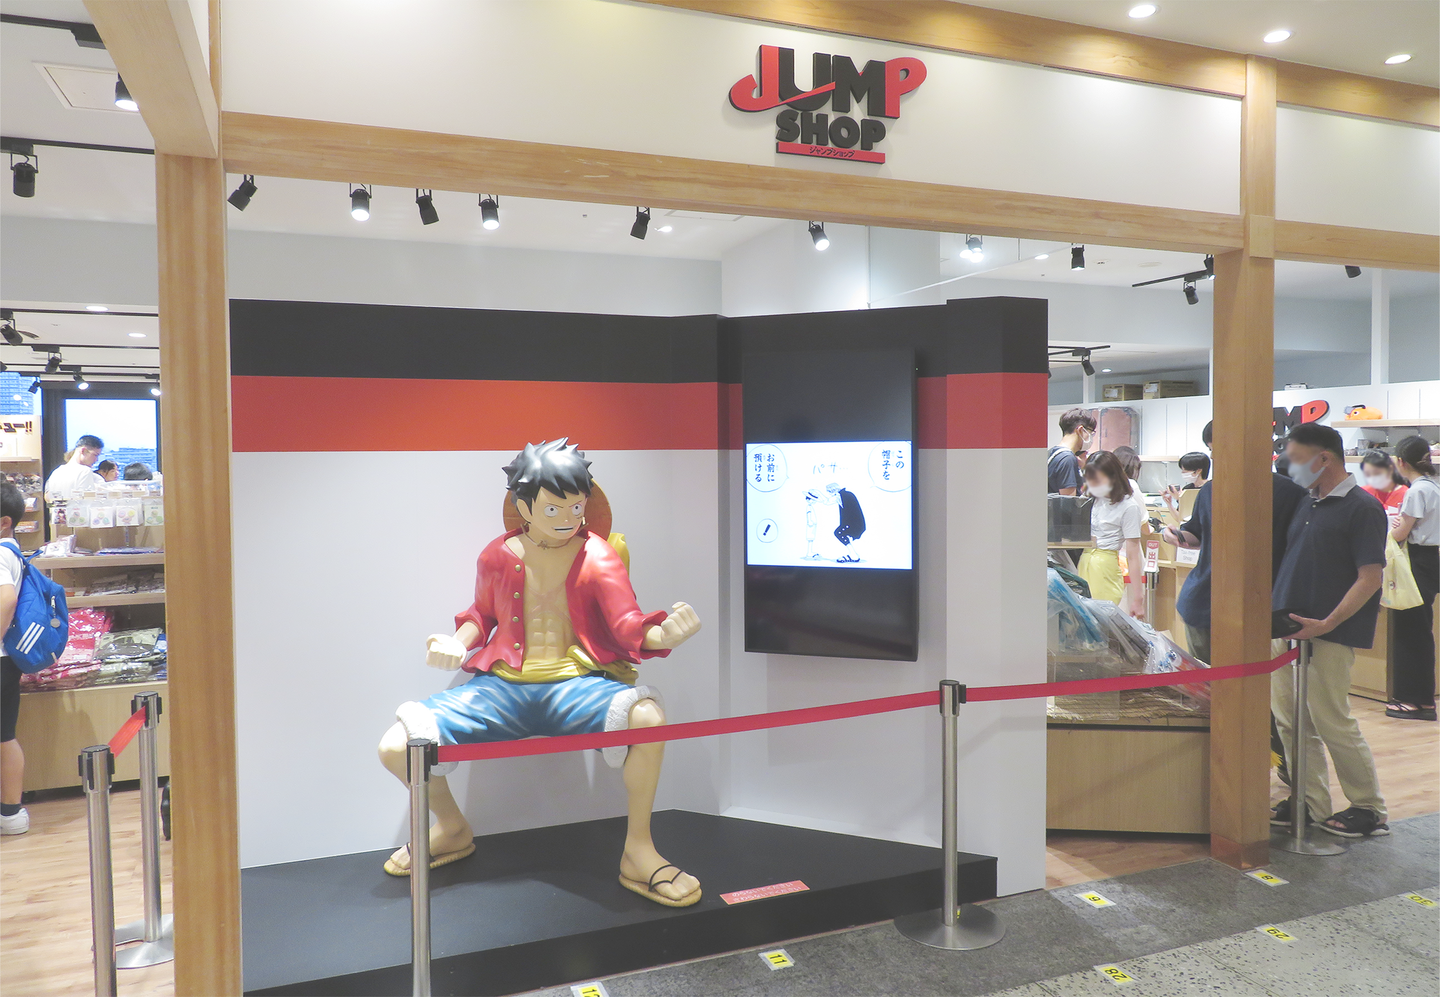 Images of the JUMP SHOP Tokyo Skytree Soramachi Store